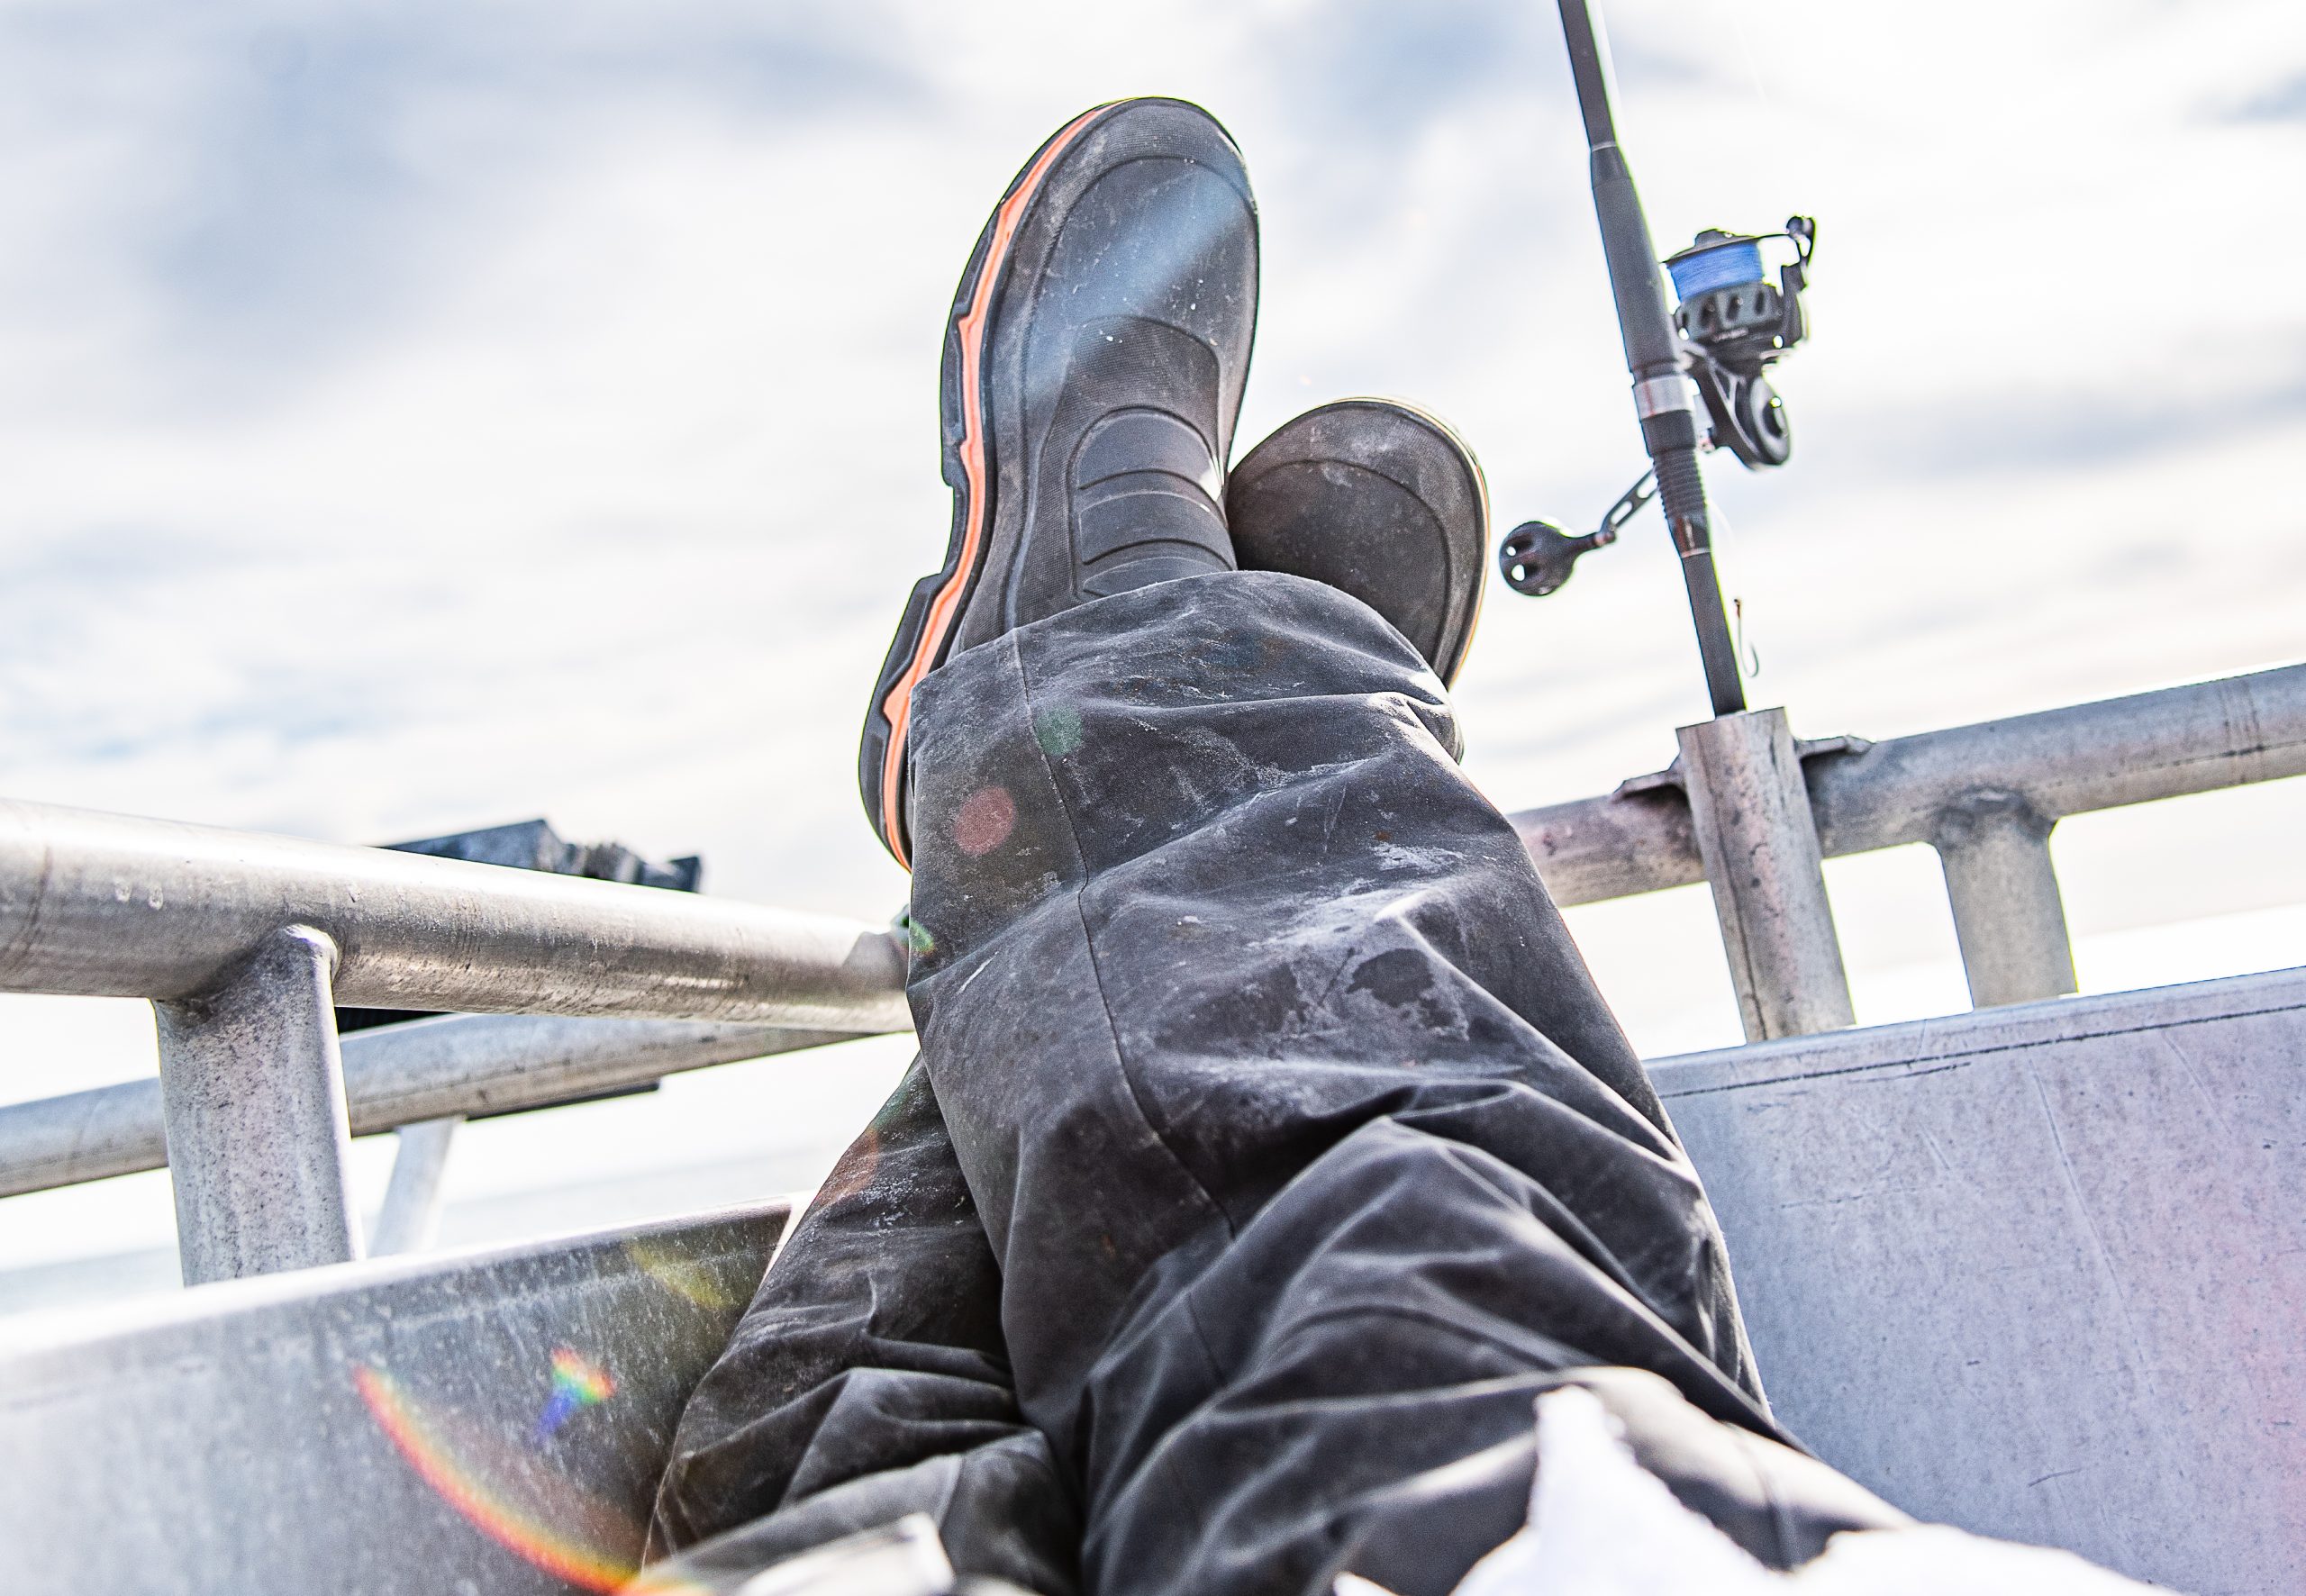 Fishing Deck Boot Buyers Guide - On The Water